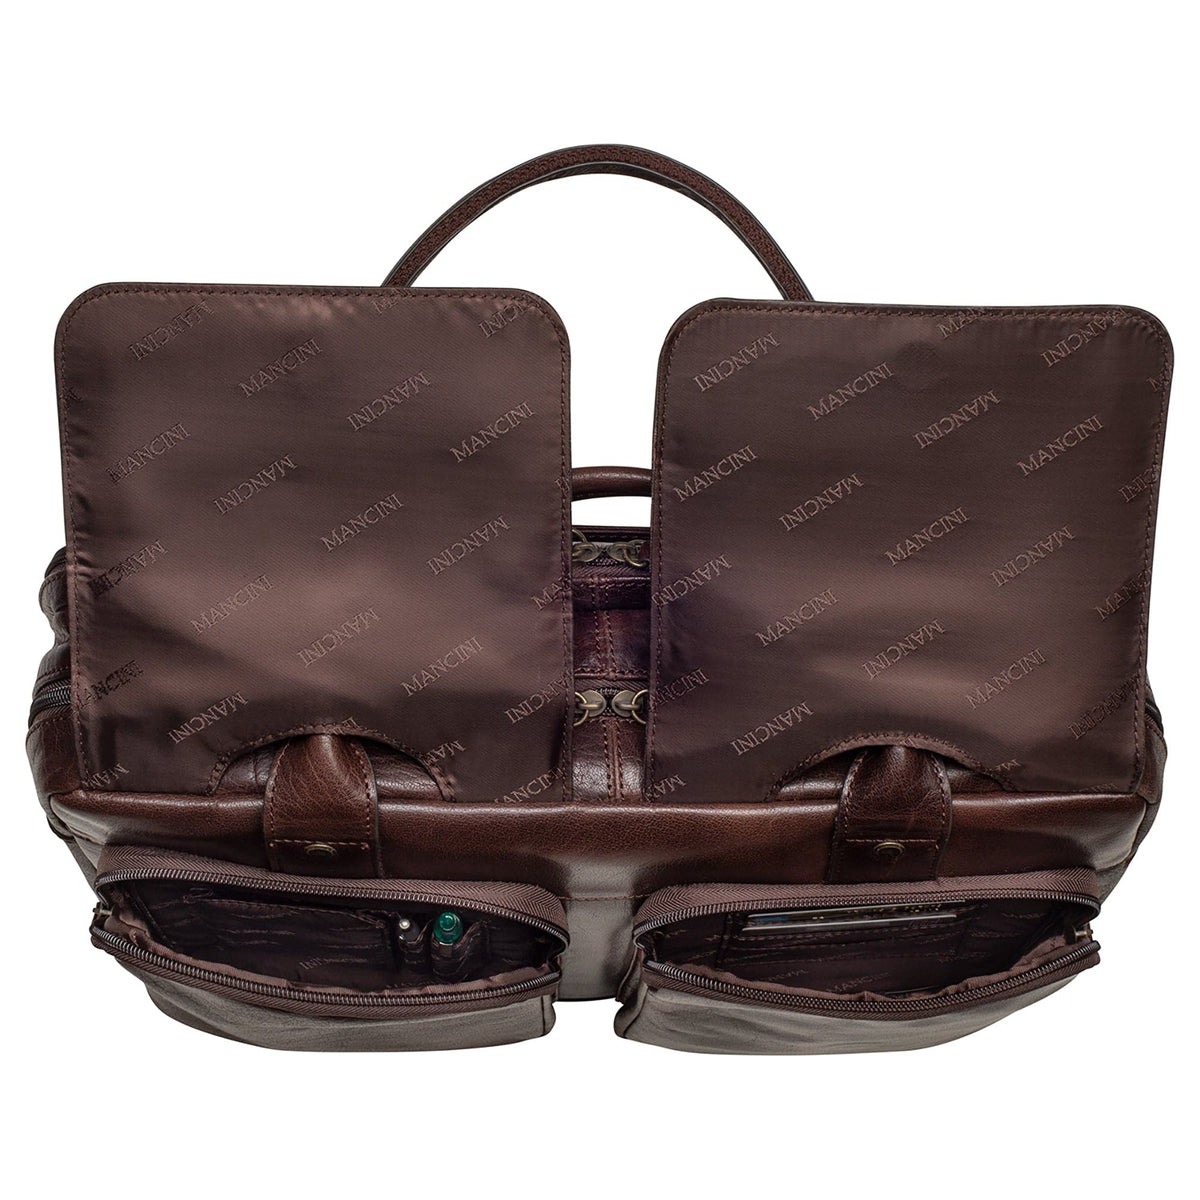 Mancini Arizona Double Compartment Briefcase for 15.6" Laptop and Tablet